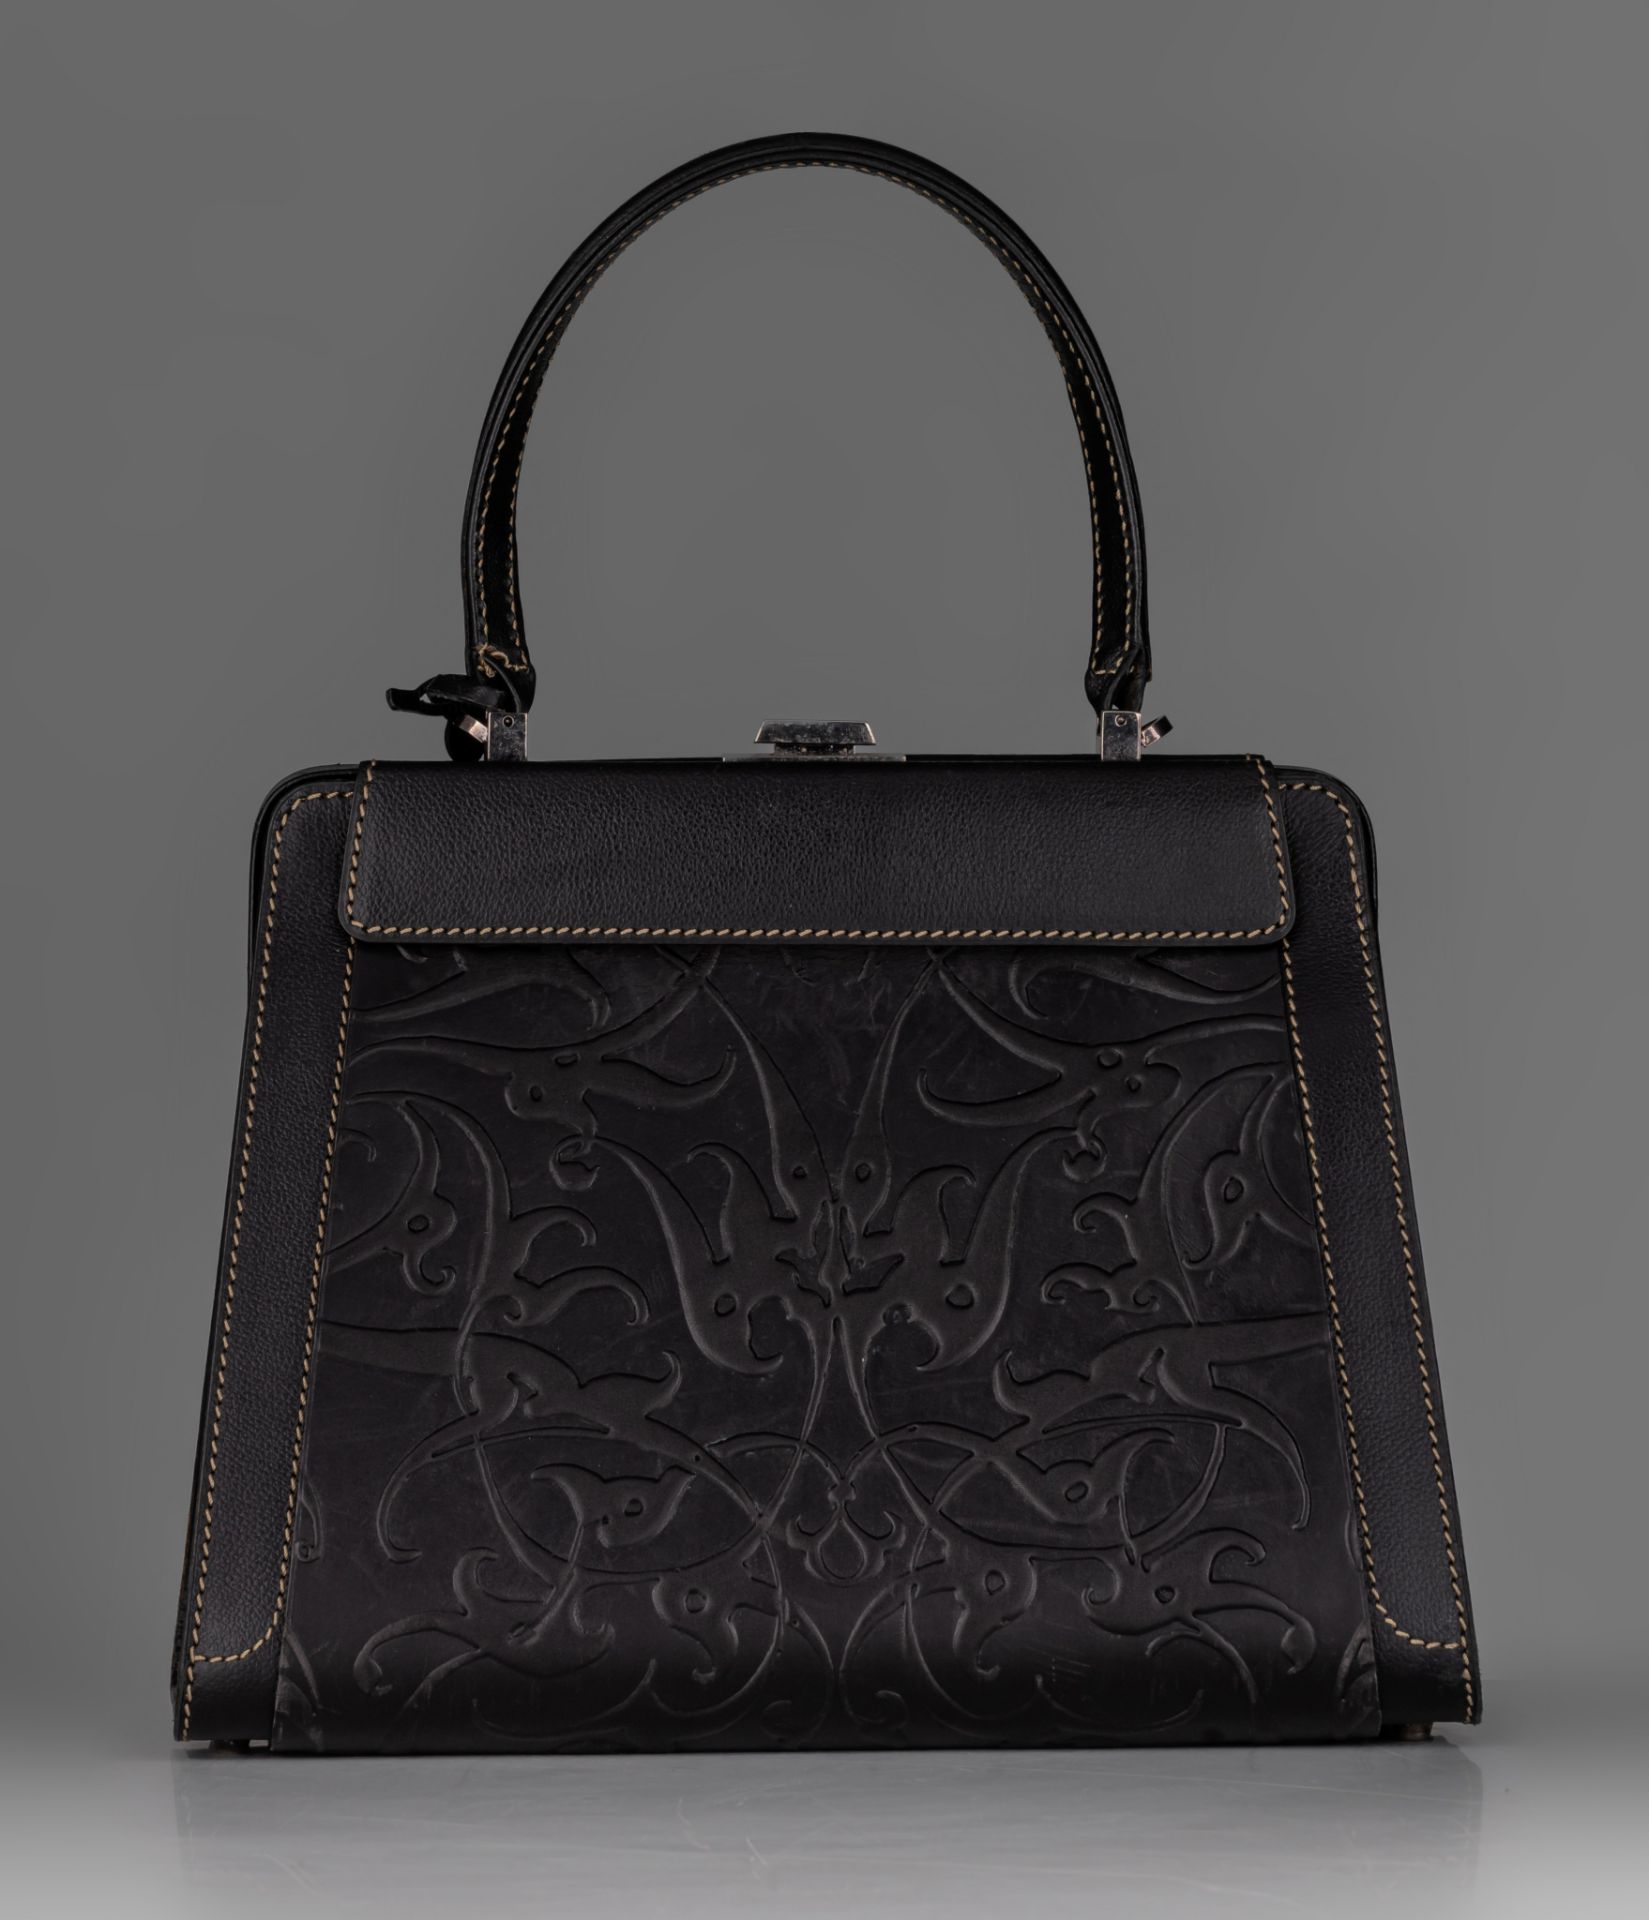 A Delvaux 'Jumping Illusion' handbag in black leather, with adjustable covers - Image 7 of 15